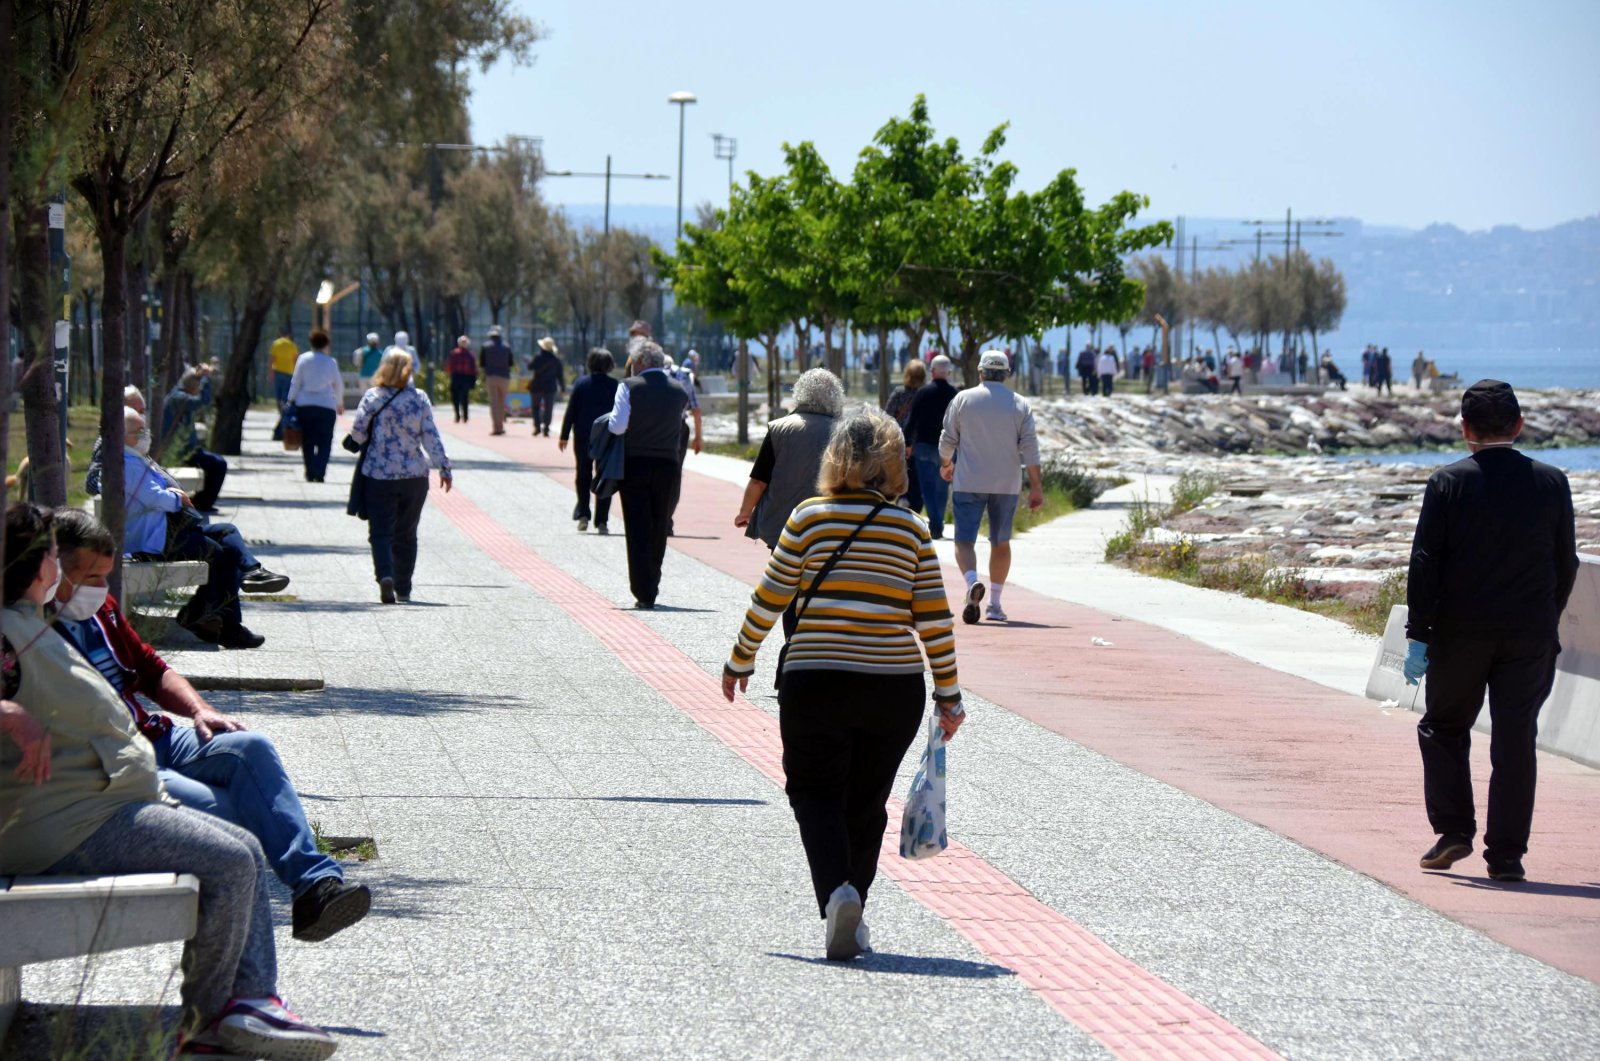 Senior citizens go for a stroll in Izmir's Karşıyaka after the curfew was temporarily lifted, May 10, 2020 (DHA Photo)